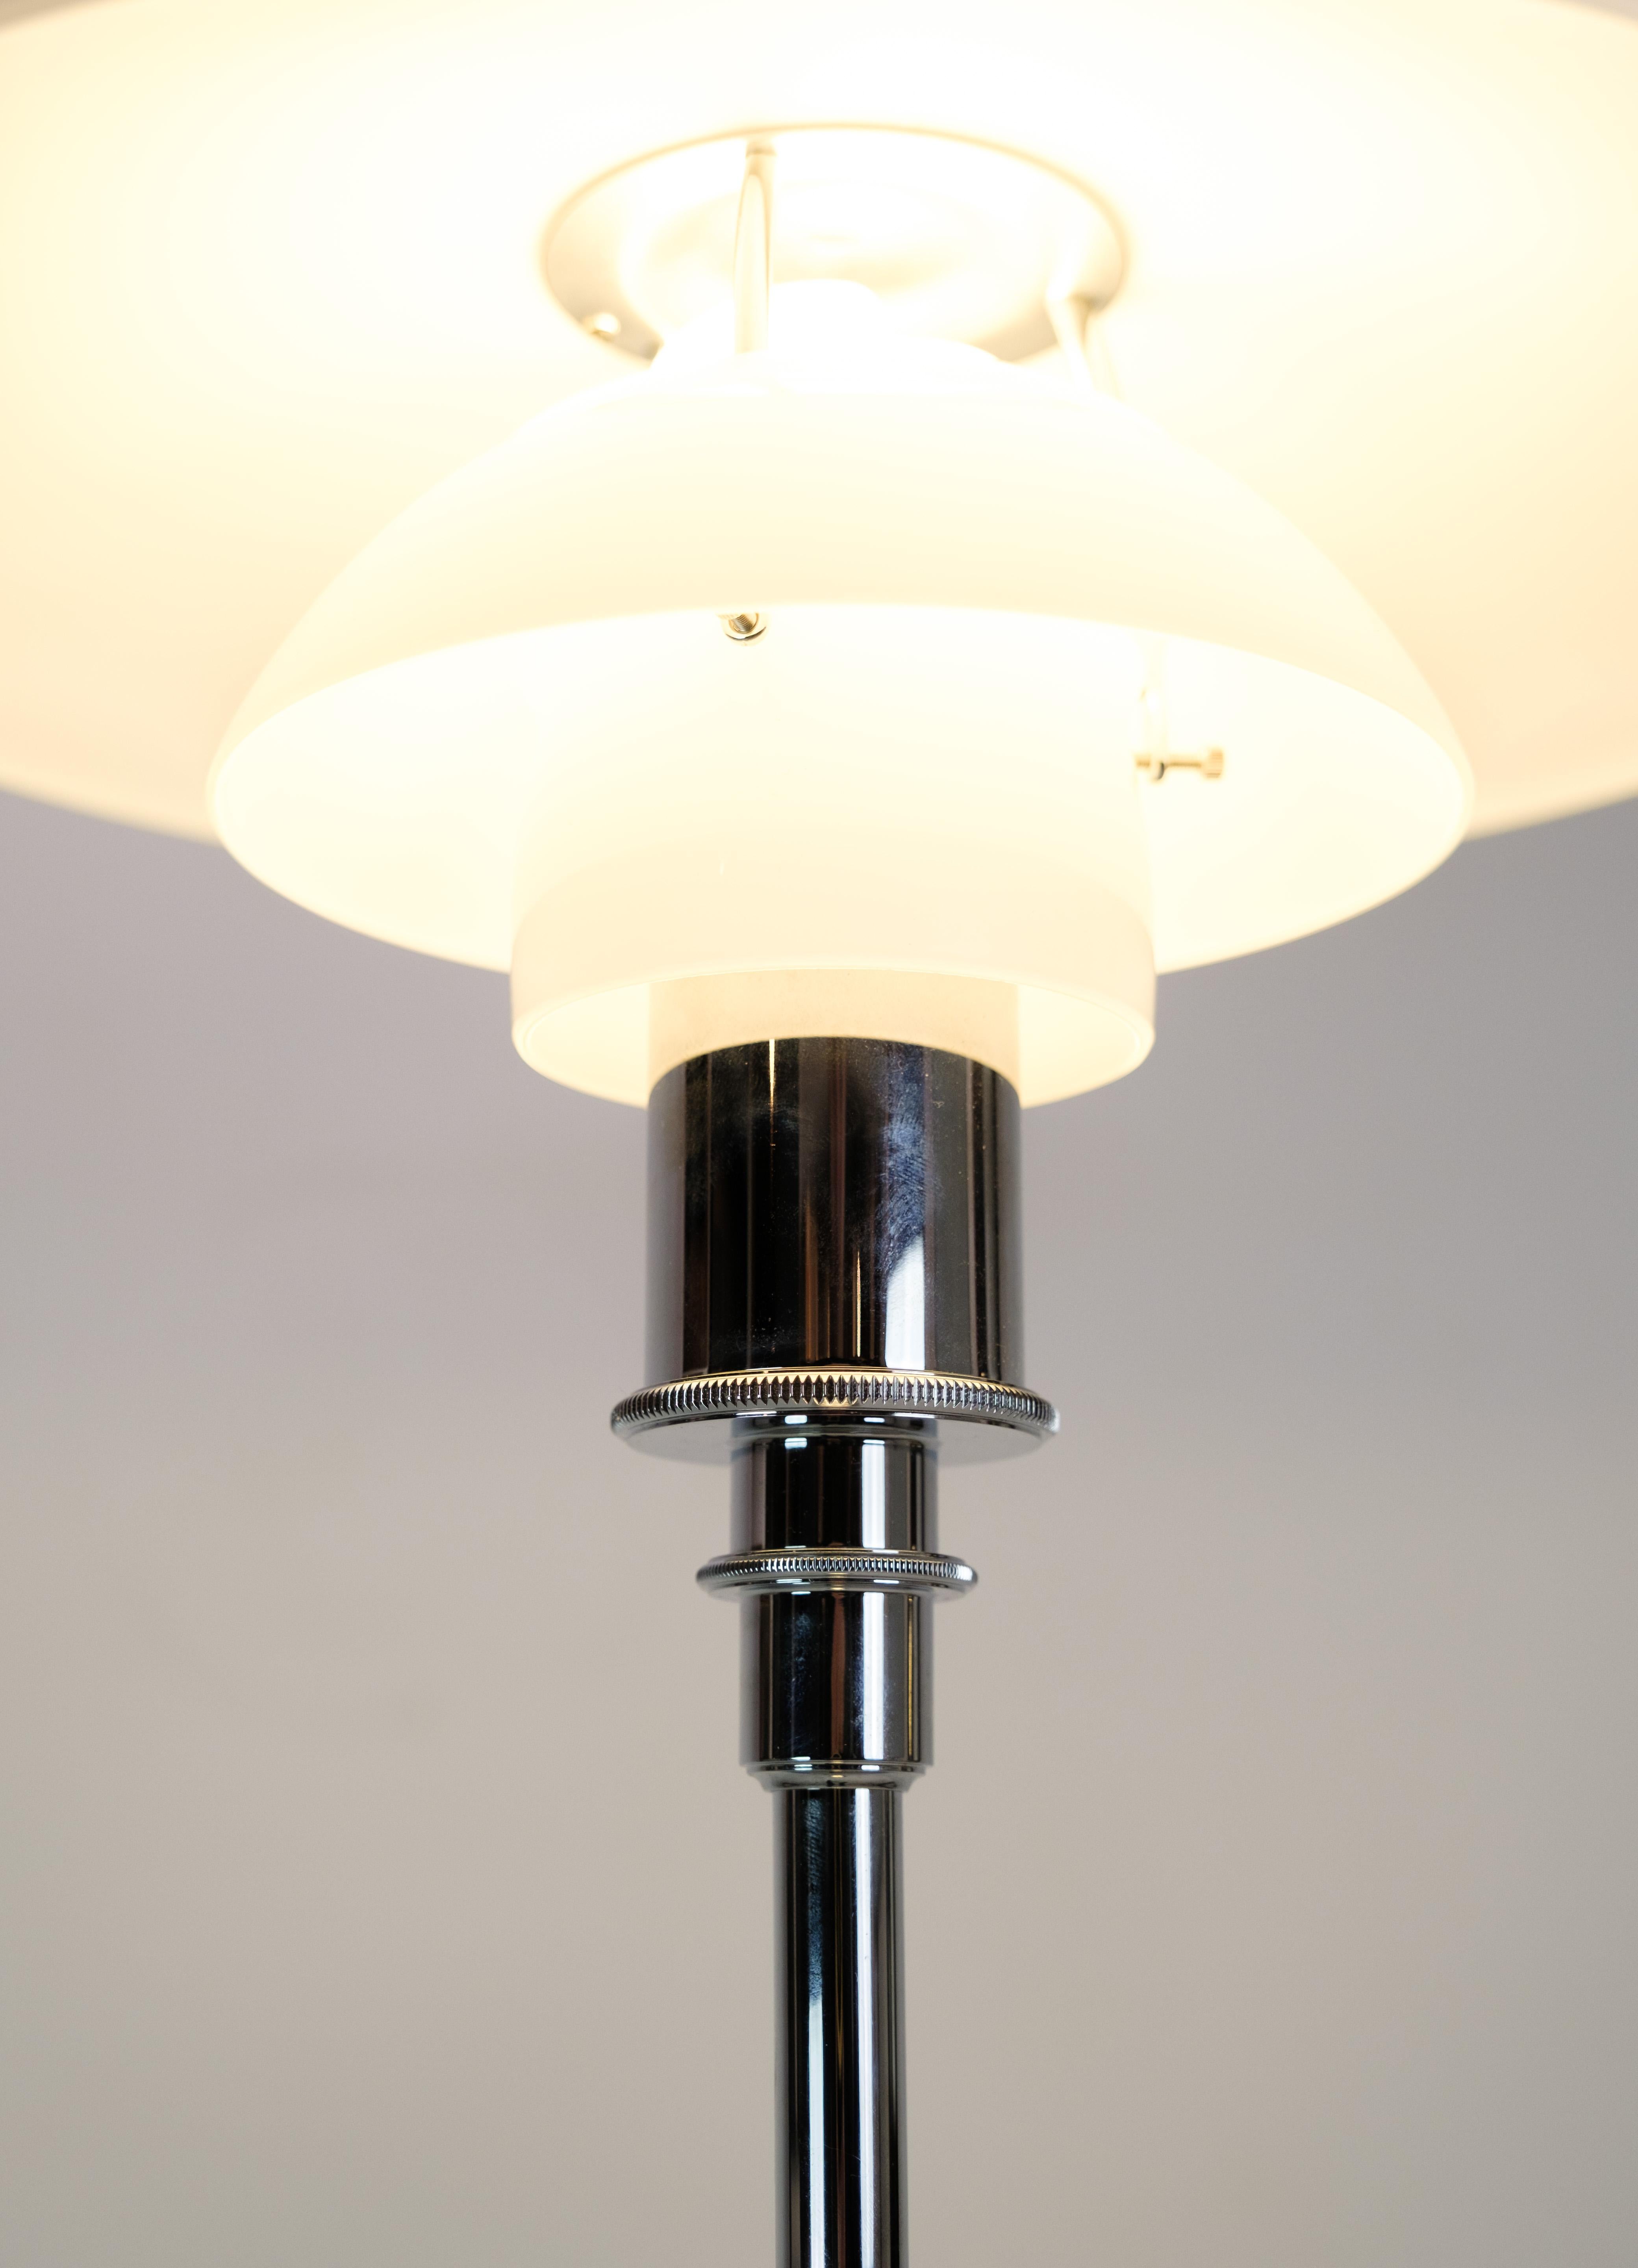 Floor lamp, Model 3½-2½ chrome, designed by Poul Henningsen with white opal glass shades made by Louis Poulsen. The frame is high-gloss chrome-plated with a black plastic cord with plug.

This product will be inspected thoroughly at our